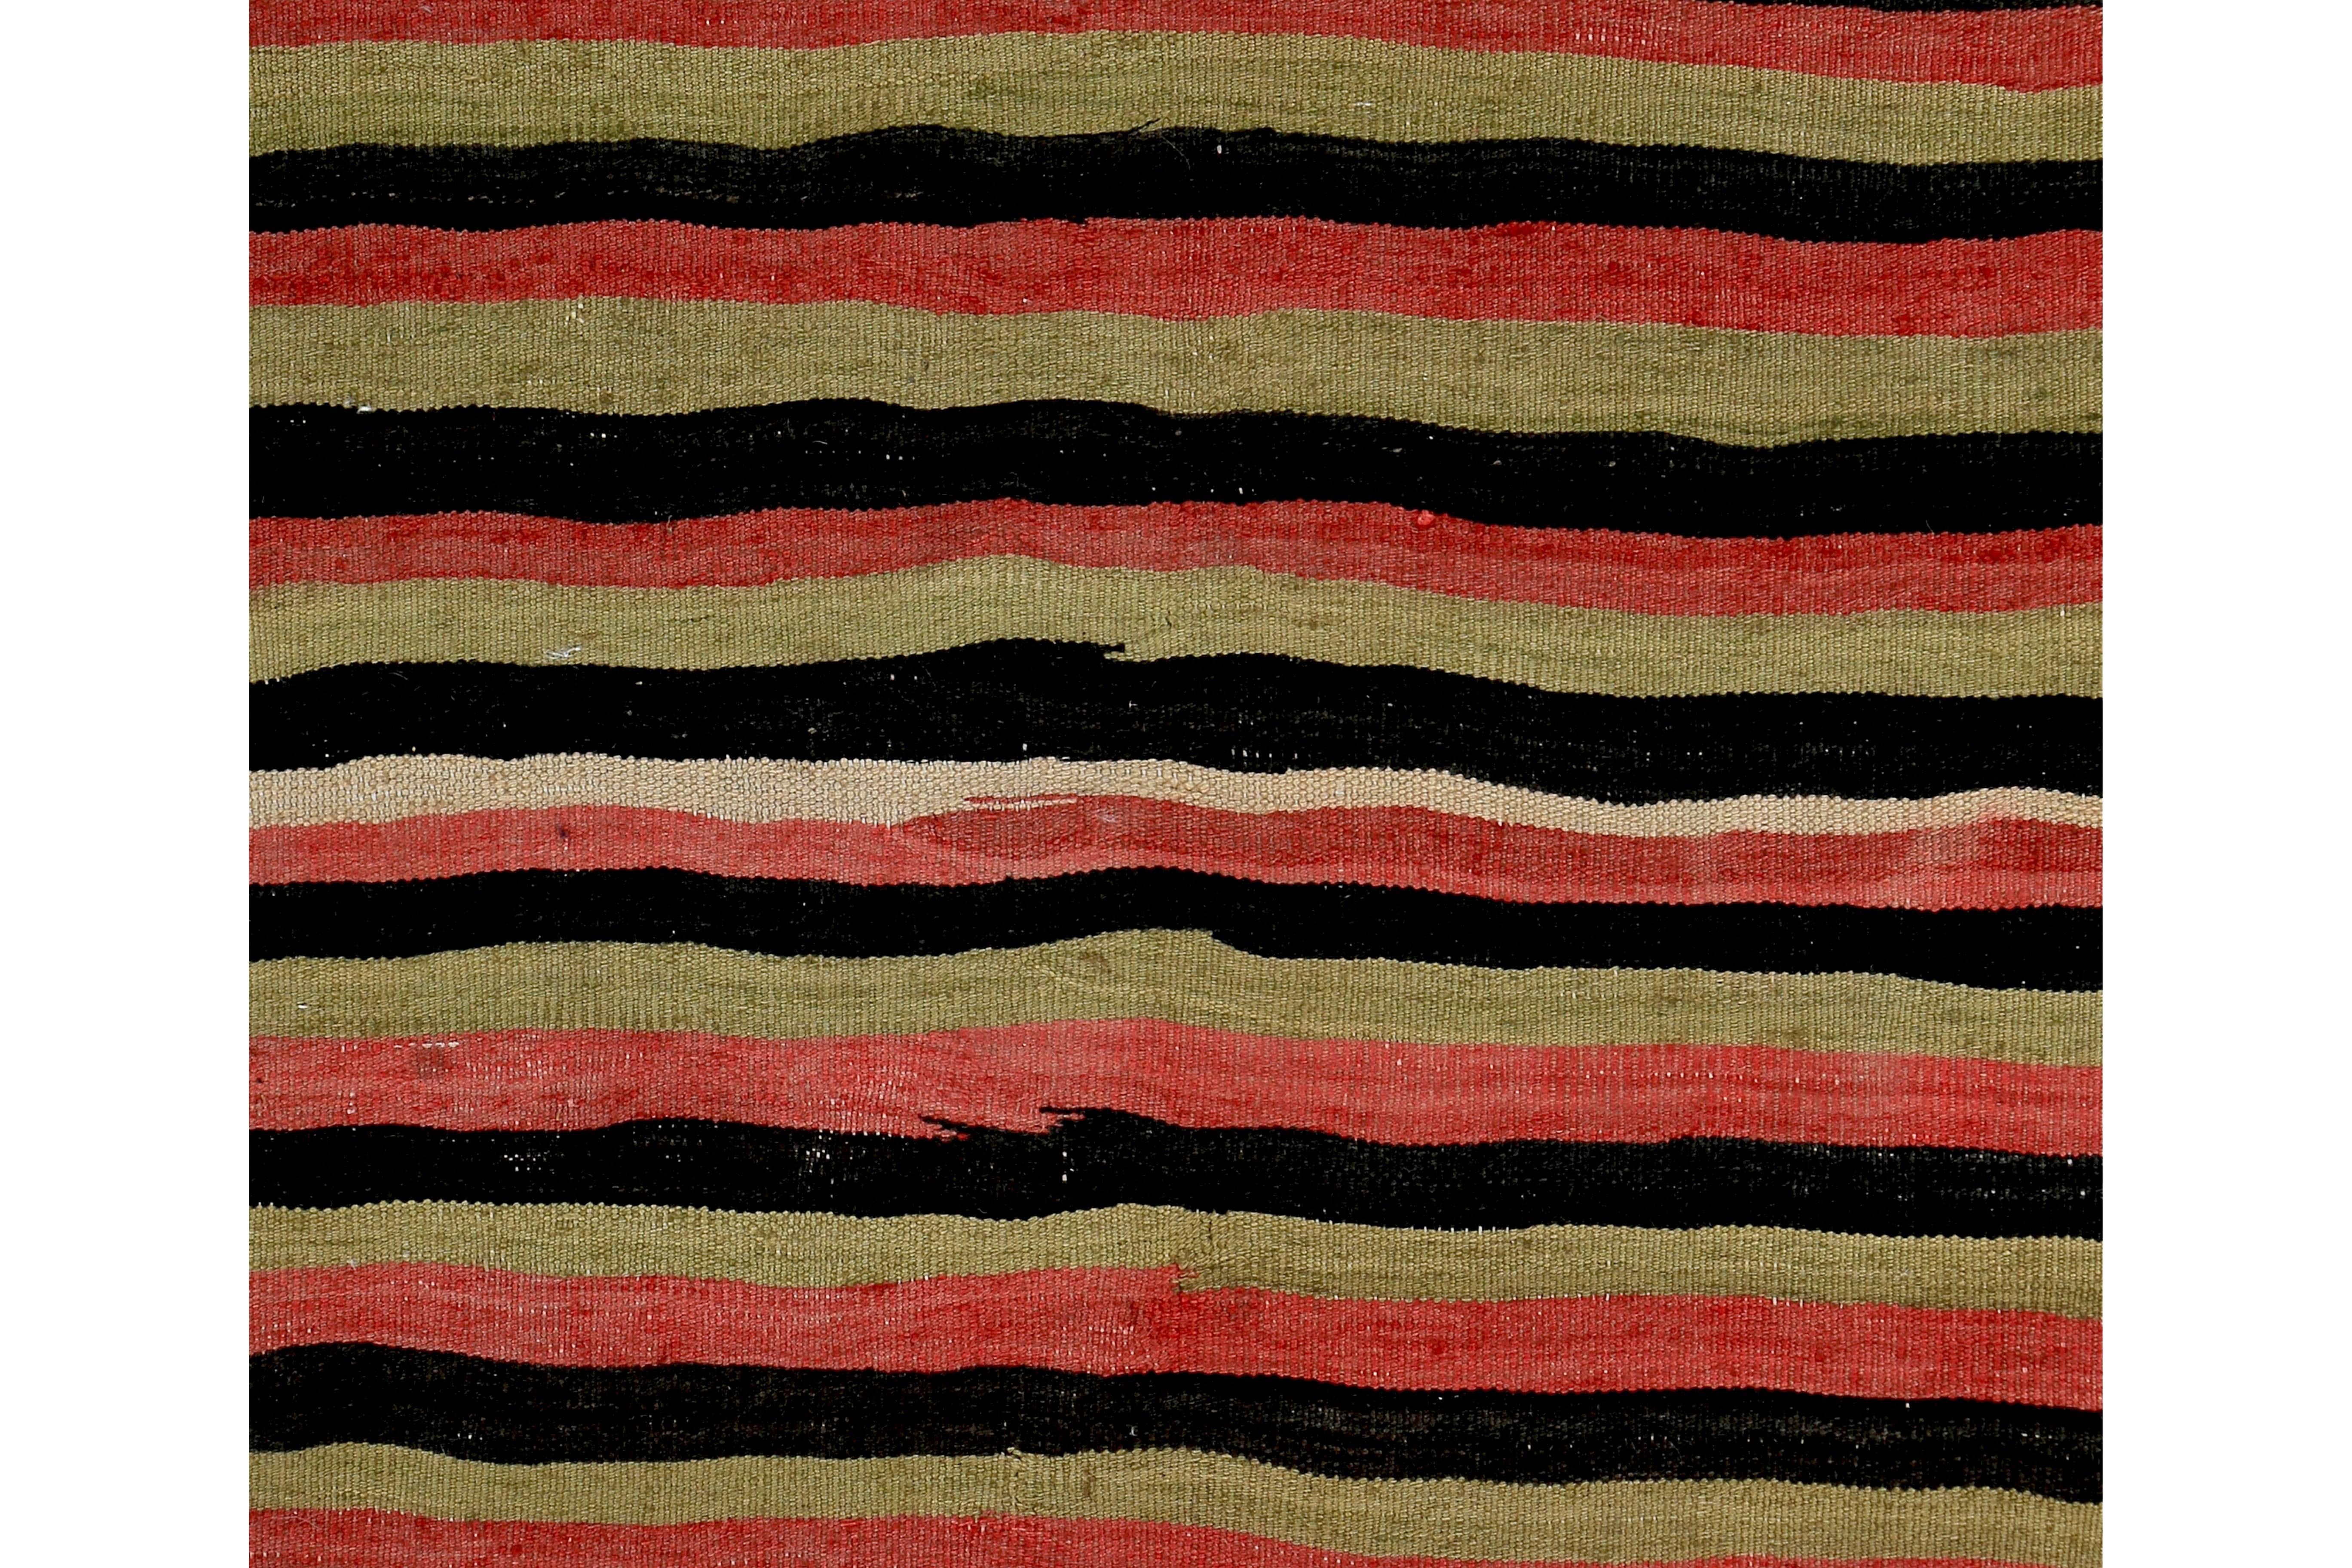 Hand-Woven Turkish Kilim Rug with Black and Red Tribal Stripes on Gold Field For Sale